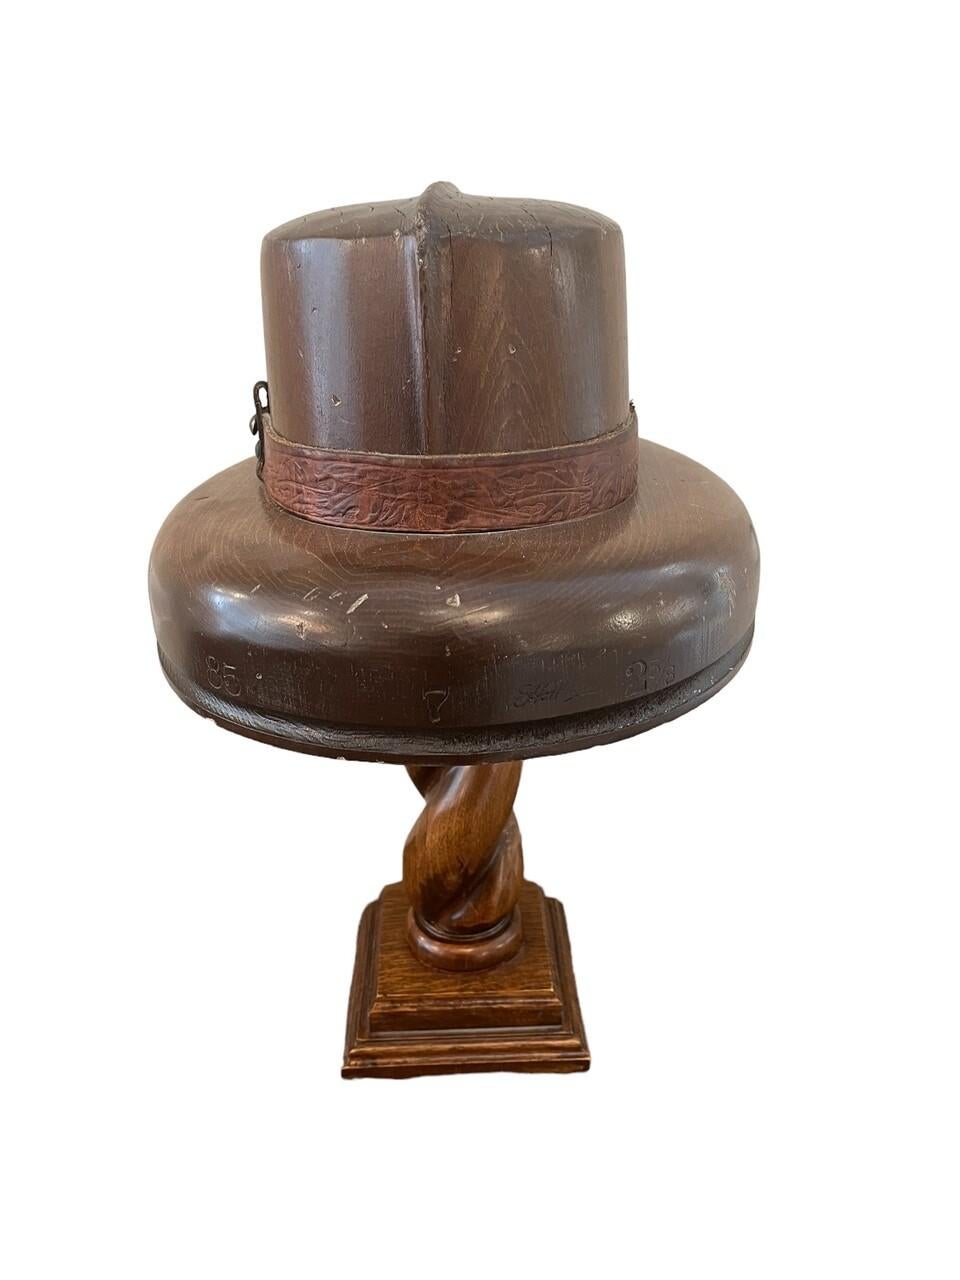 English wood hat mold on wood stand.
Men’s brimmed hat with leather detail
circa 1910-1920